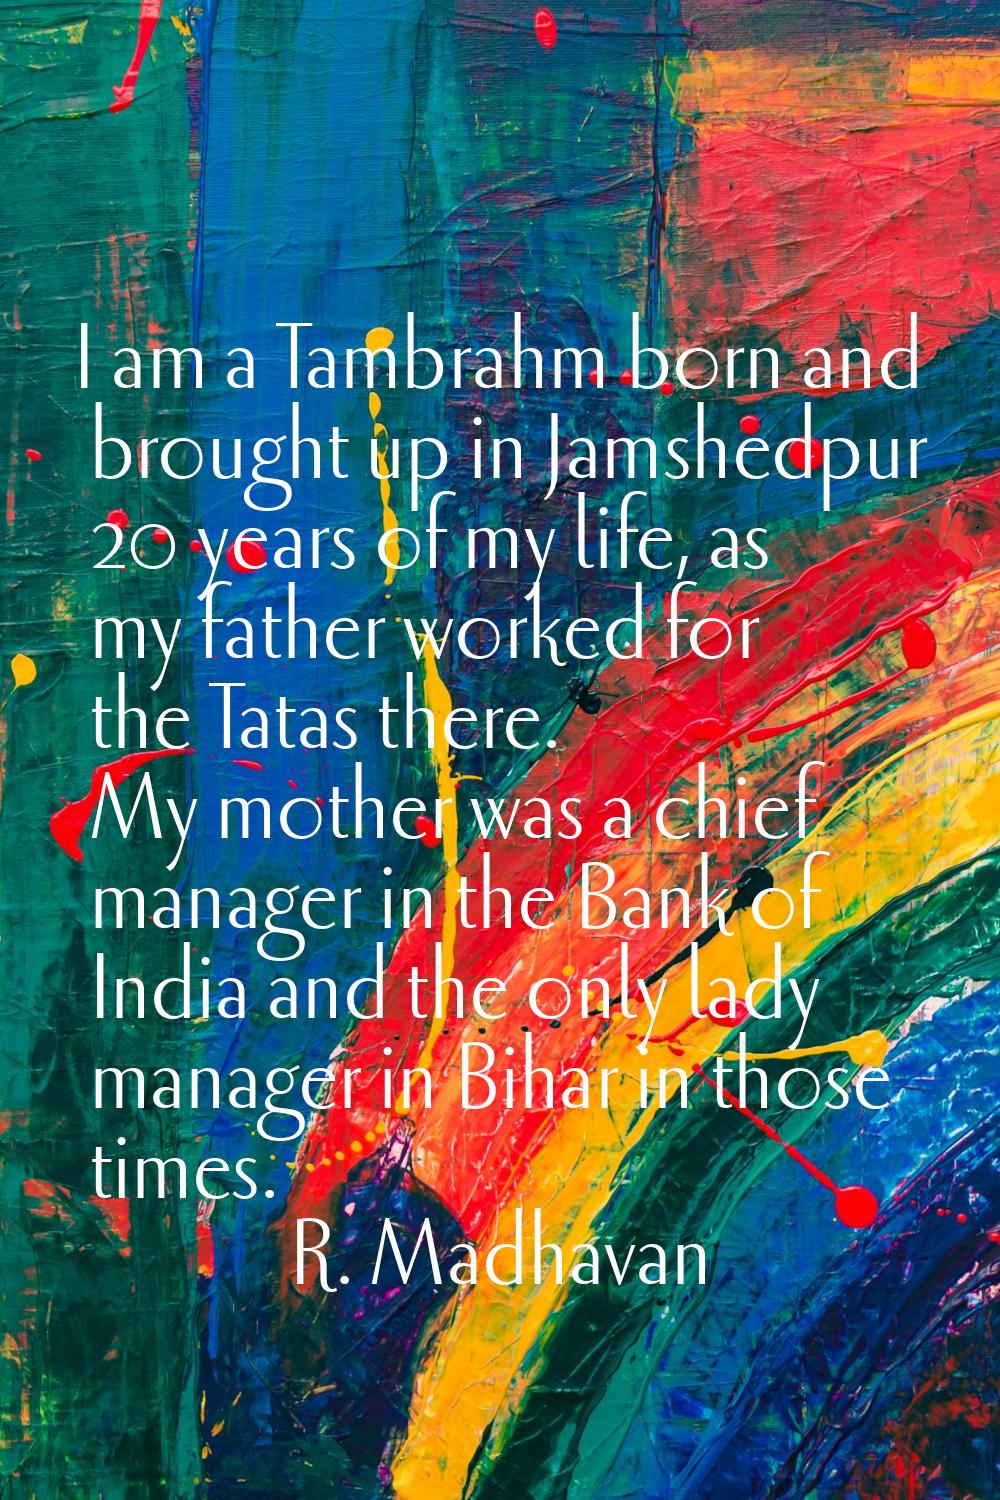 I am a Tambrahm born and brought up in Jamshedpur 20 years of my life, as my father worked for the 